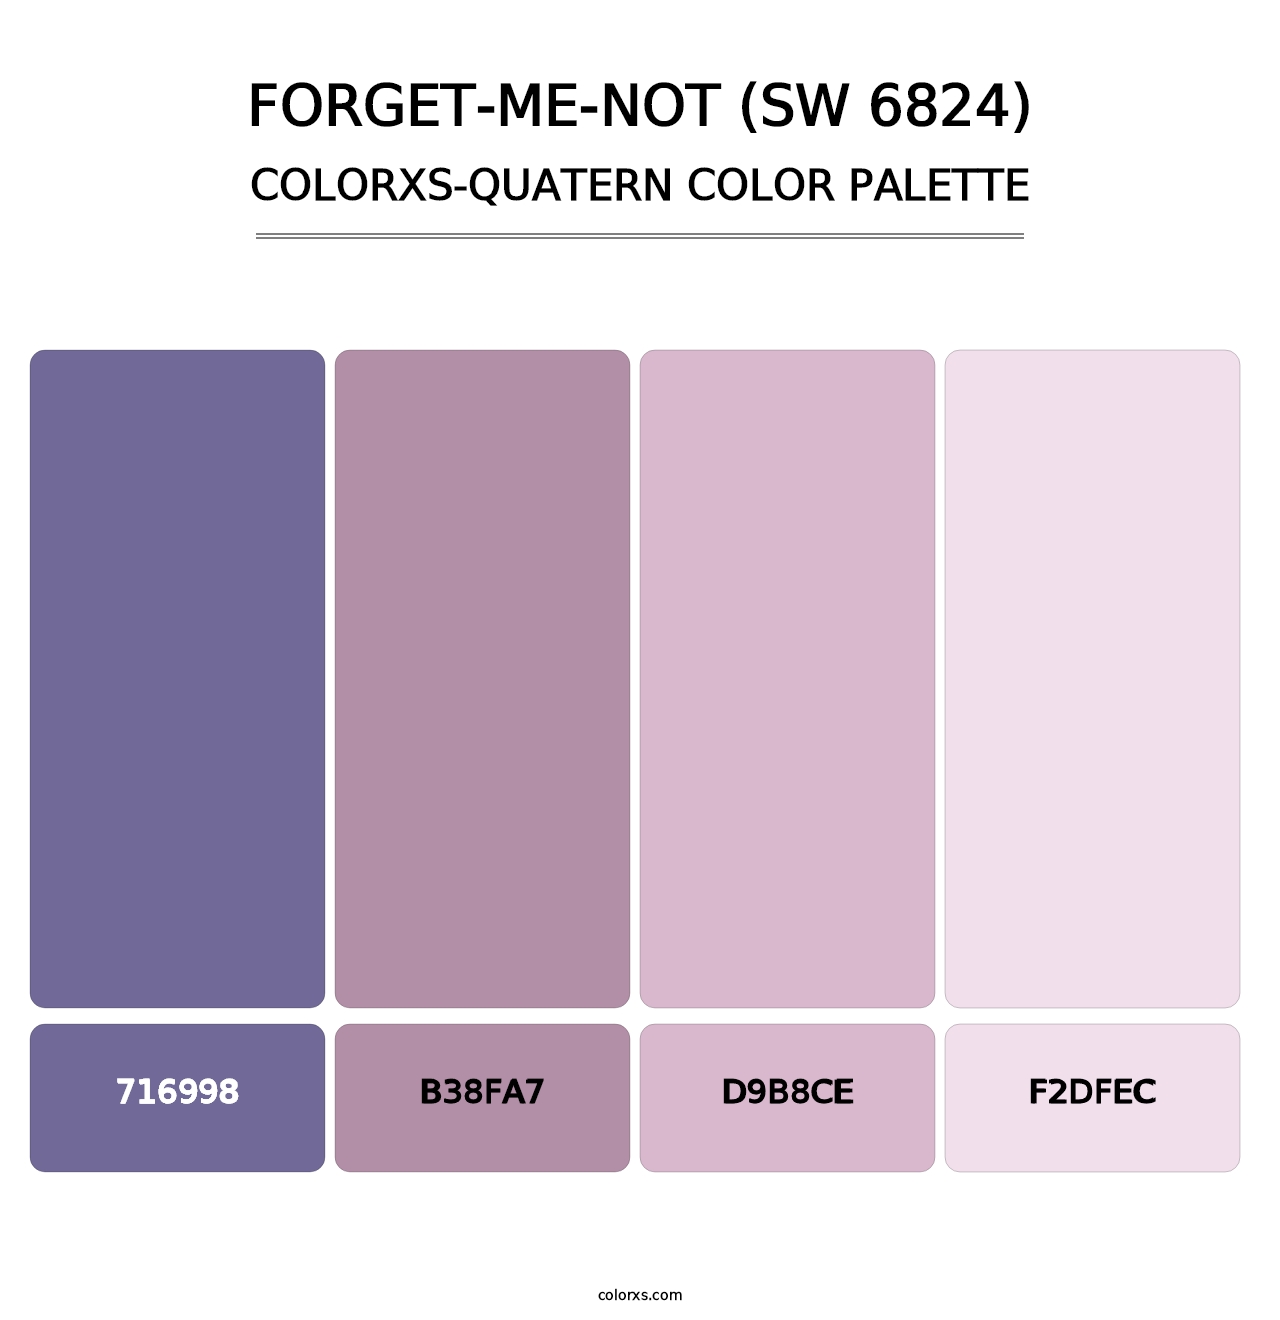 Forget-Me-Not (SW 6824) - Colorxs Quatern Palette